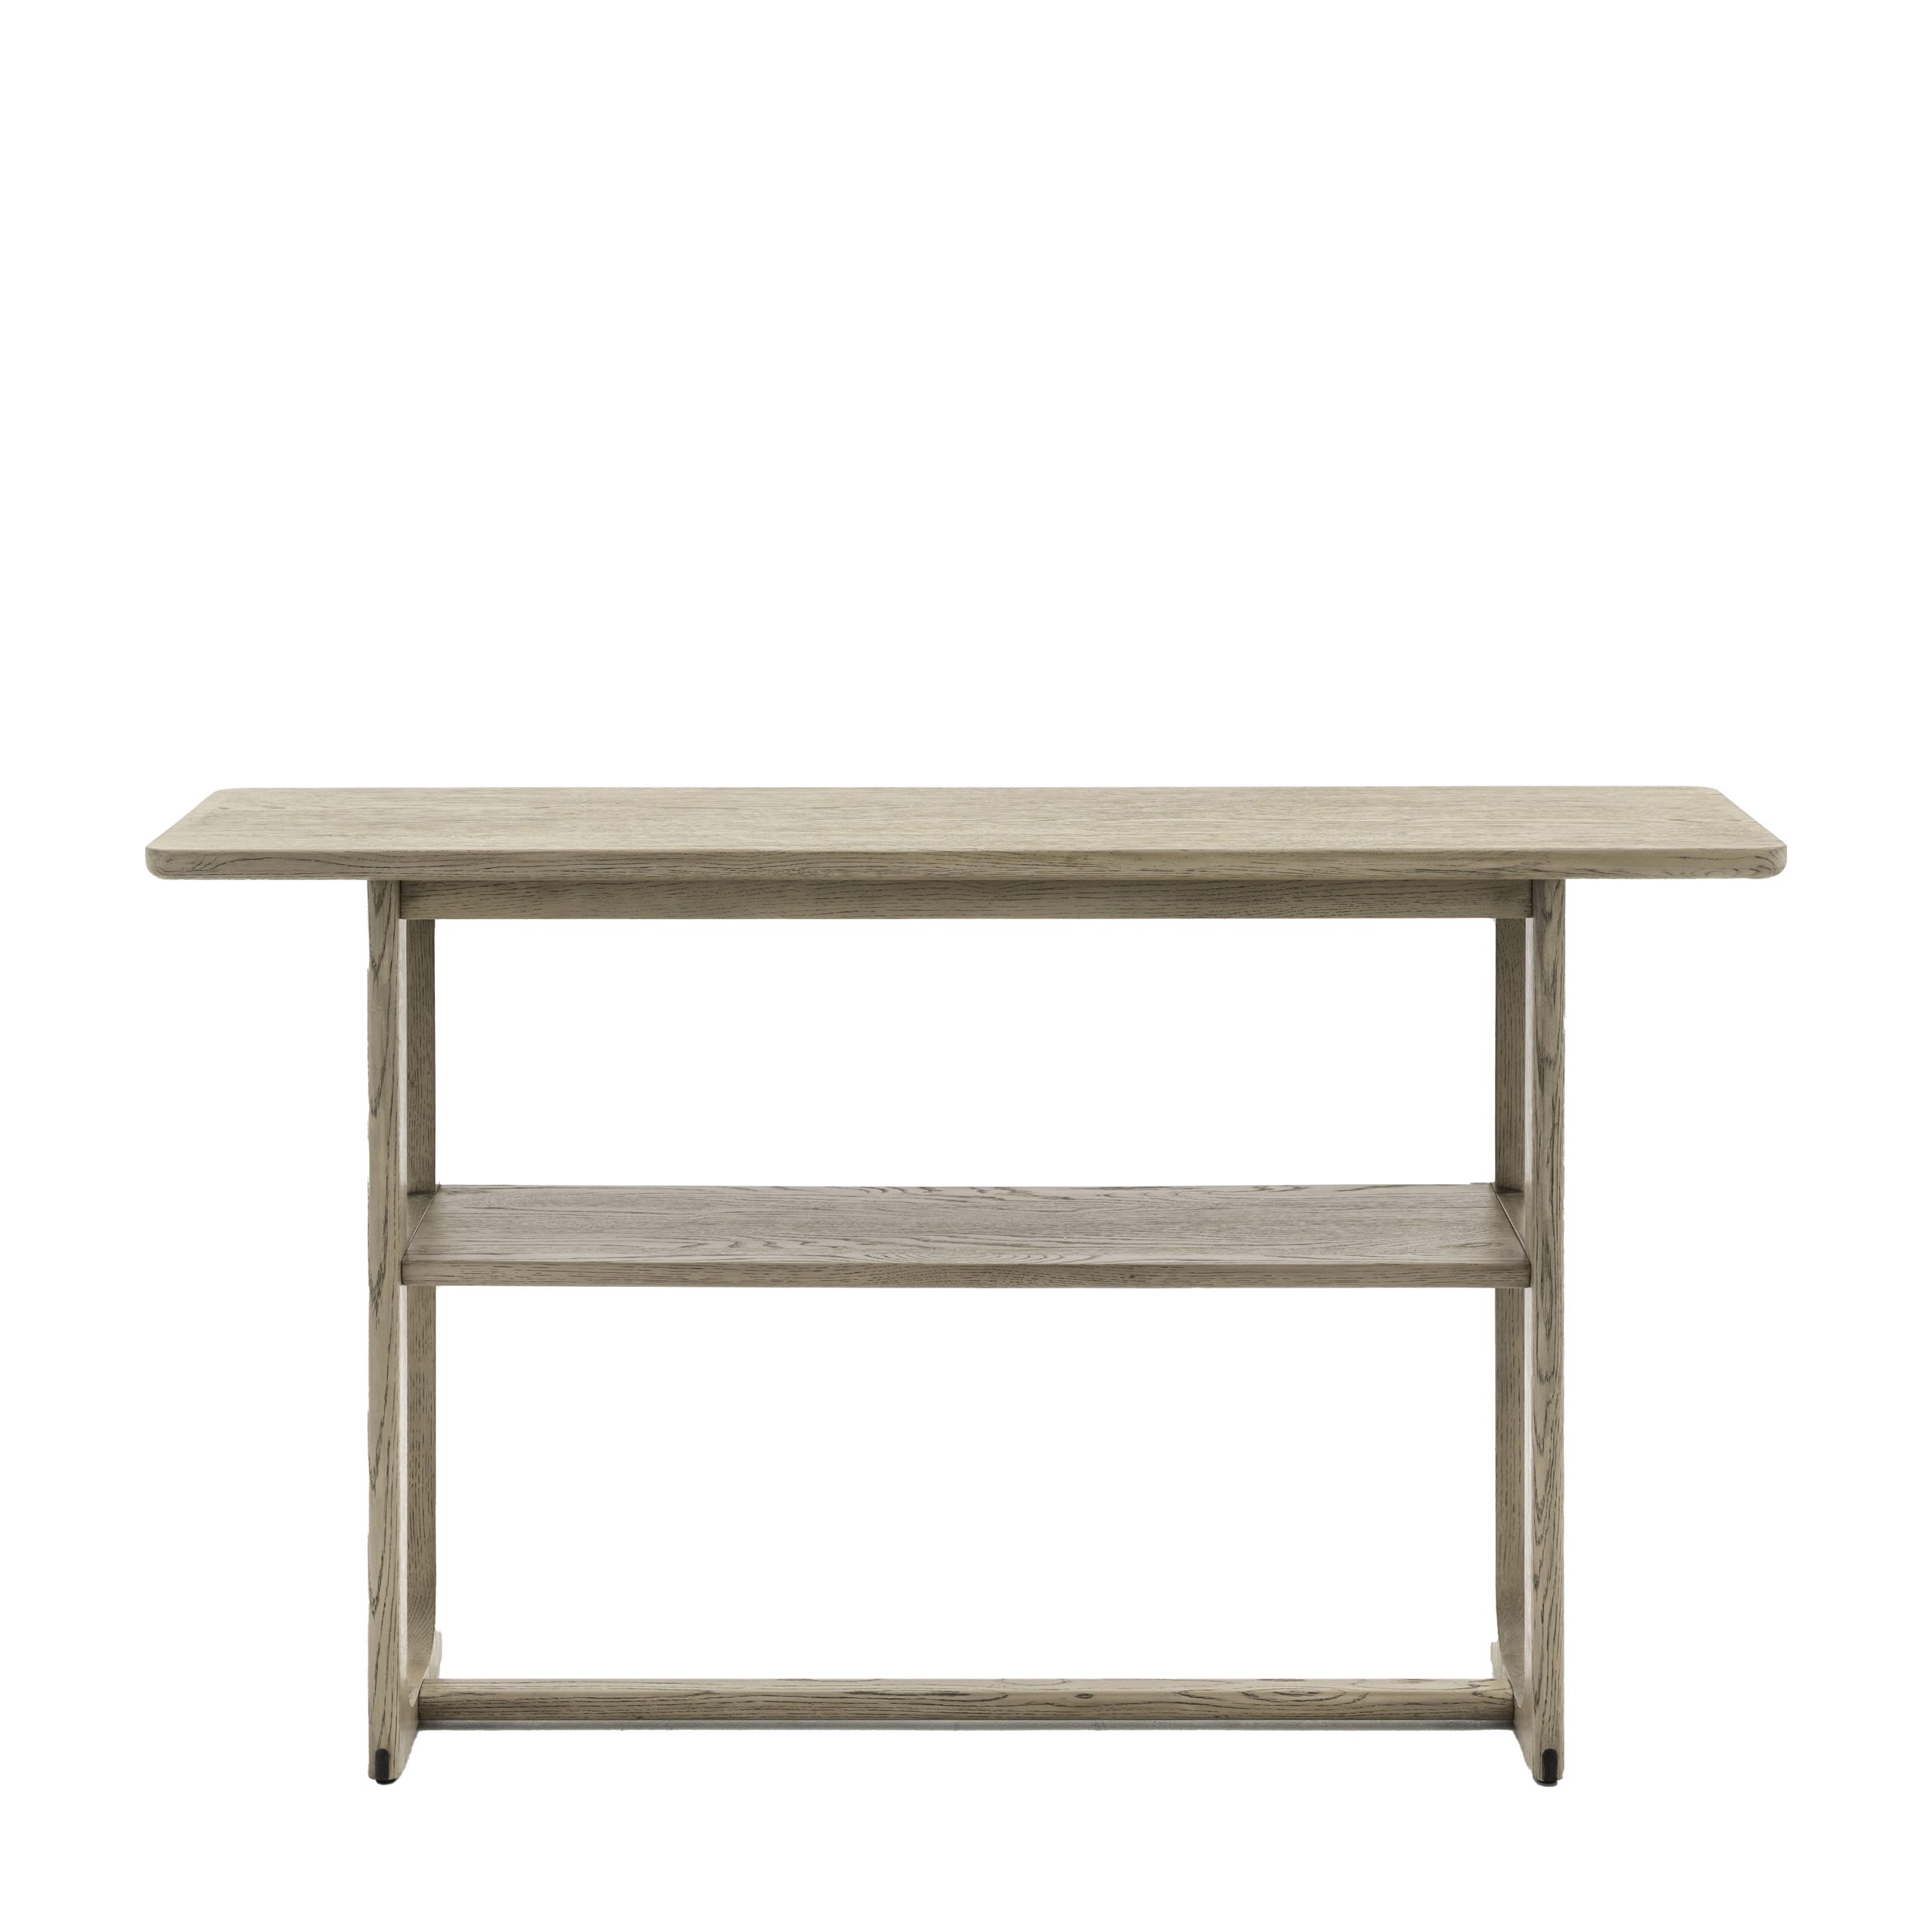 Gallery Direct Craft Console Table Smoked